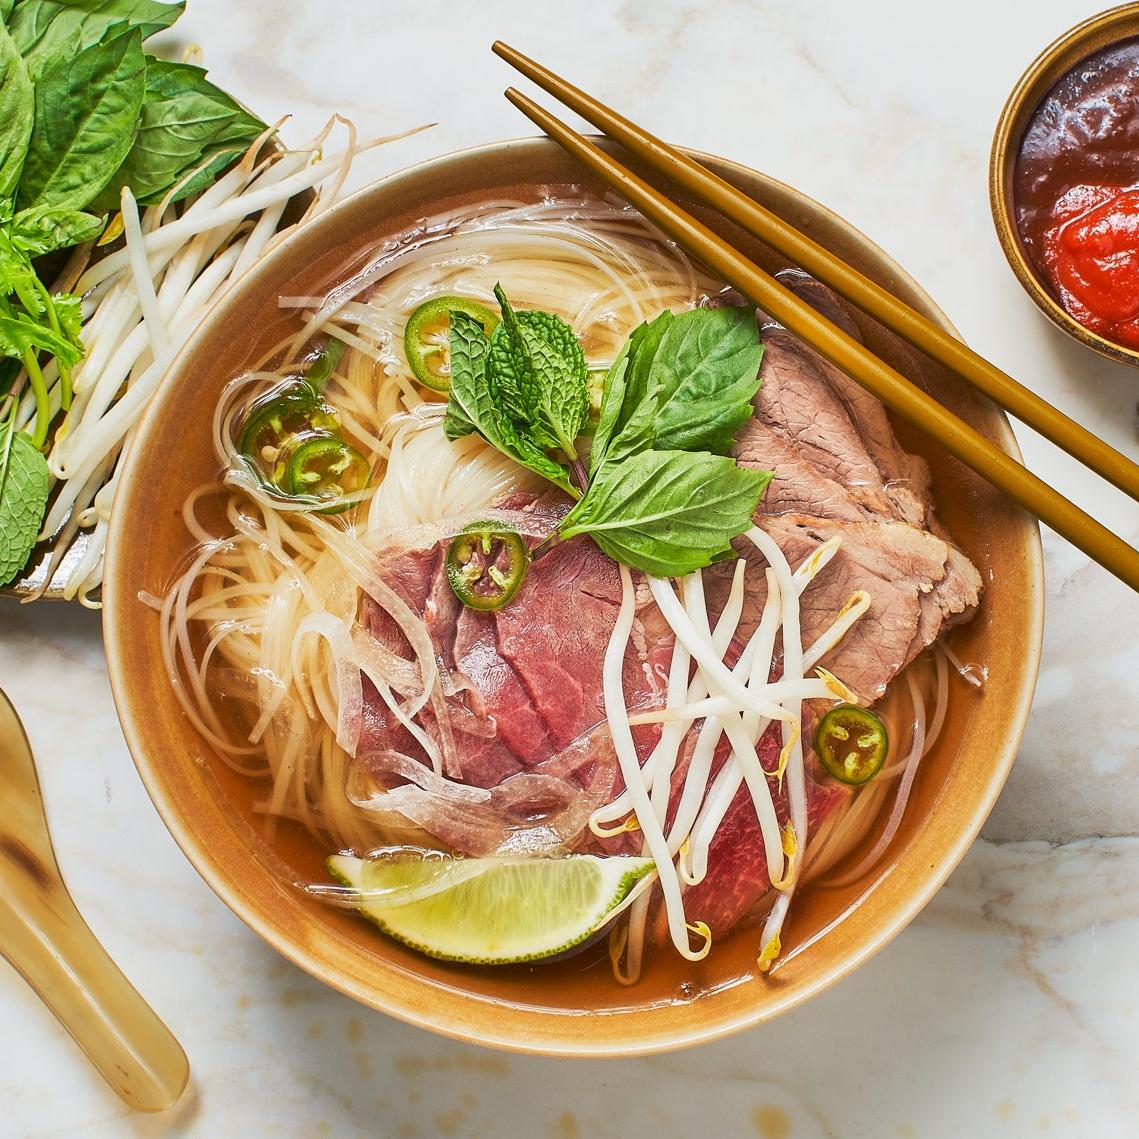  You won't be able to get enough of the mouthwatering flavors in this Beef Pho recipe.